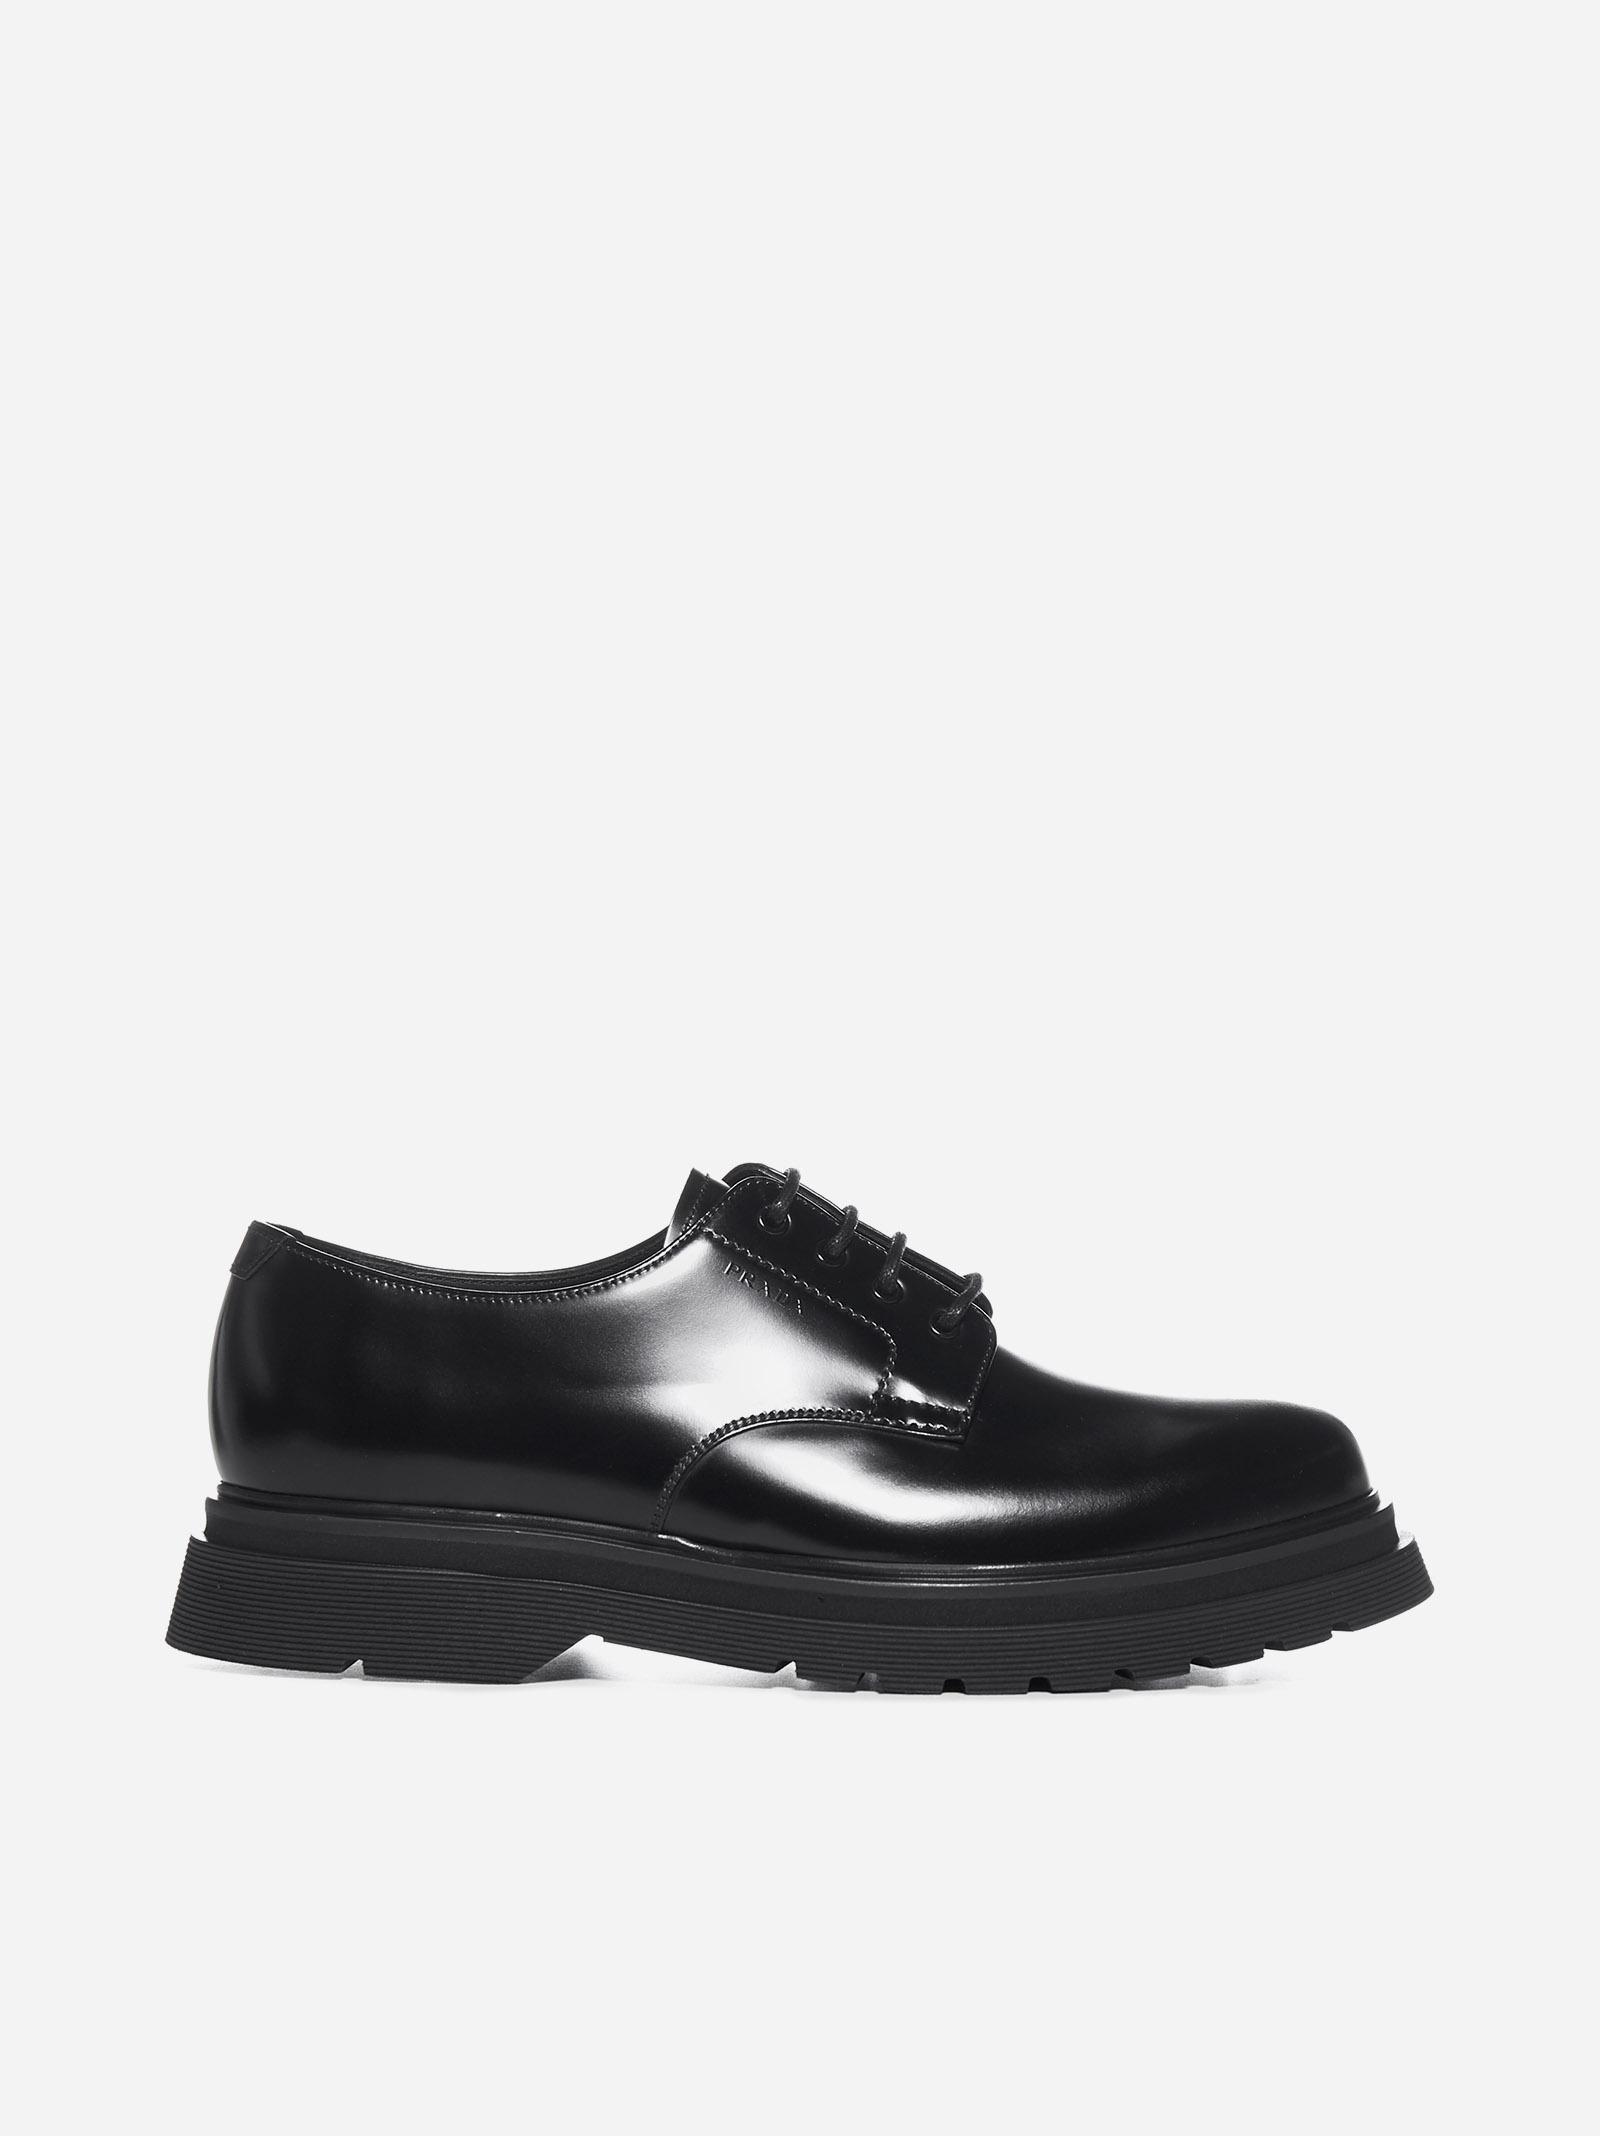 Prada Chunky Sole Leather Derby Shoes in Black for Men - Lyst